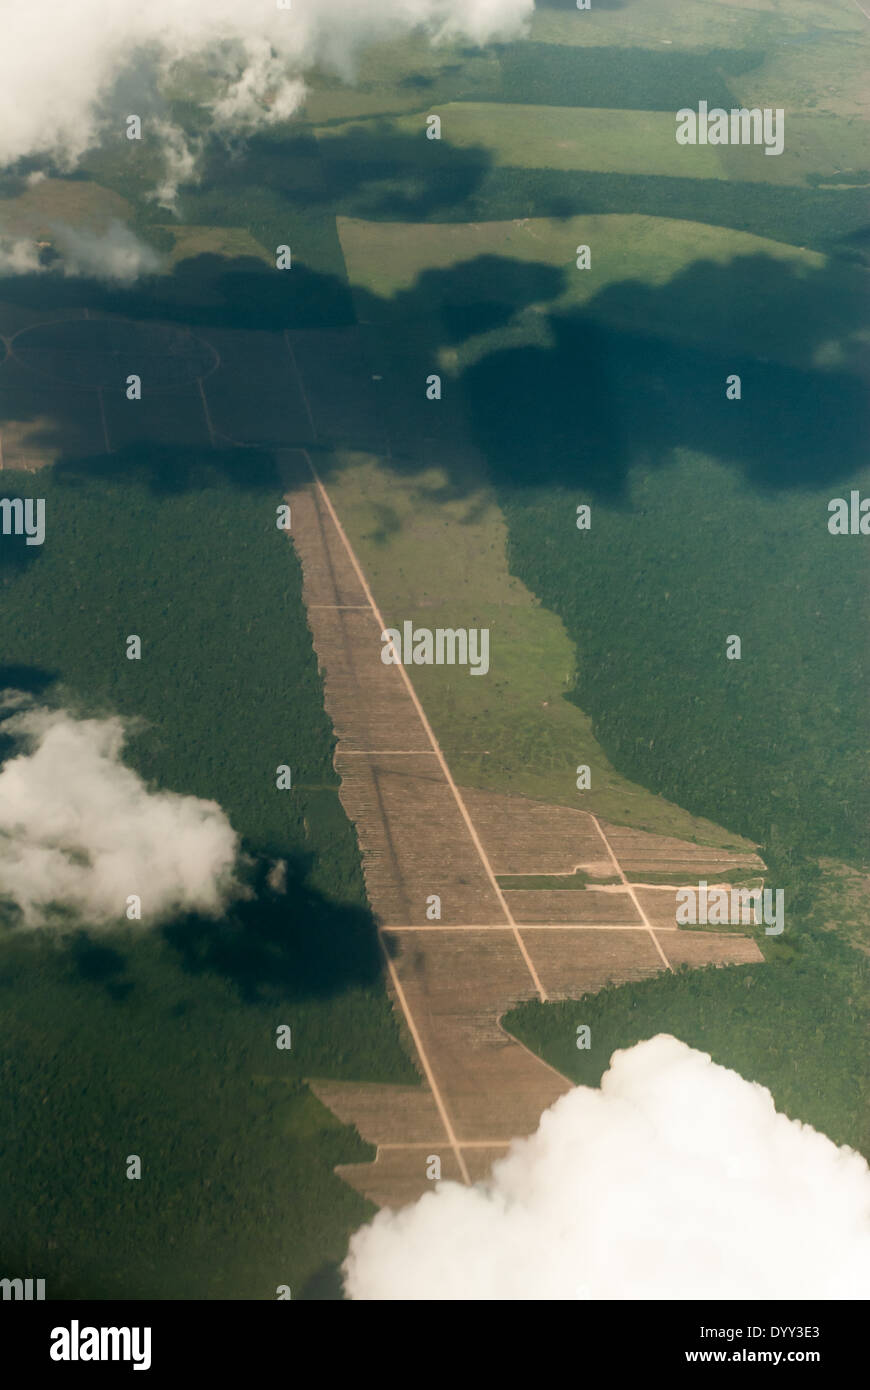 Para State, Brazil. Deforestation. Aerial view of new road with neatly laid out geometric field boundaries. Stock Photo